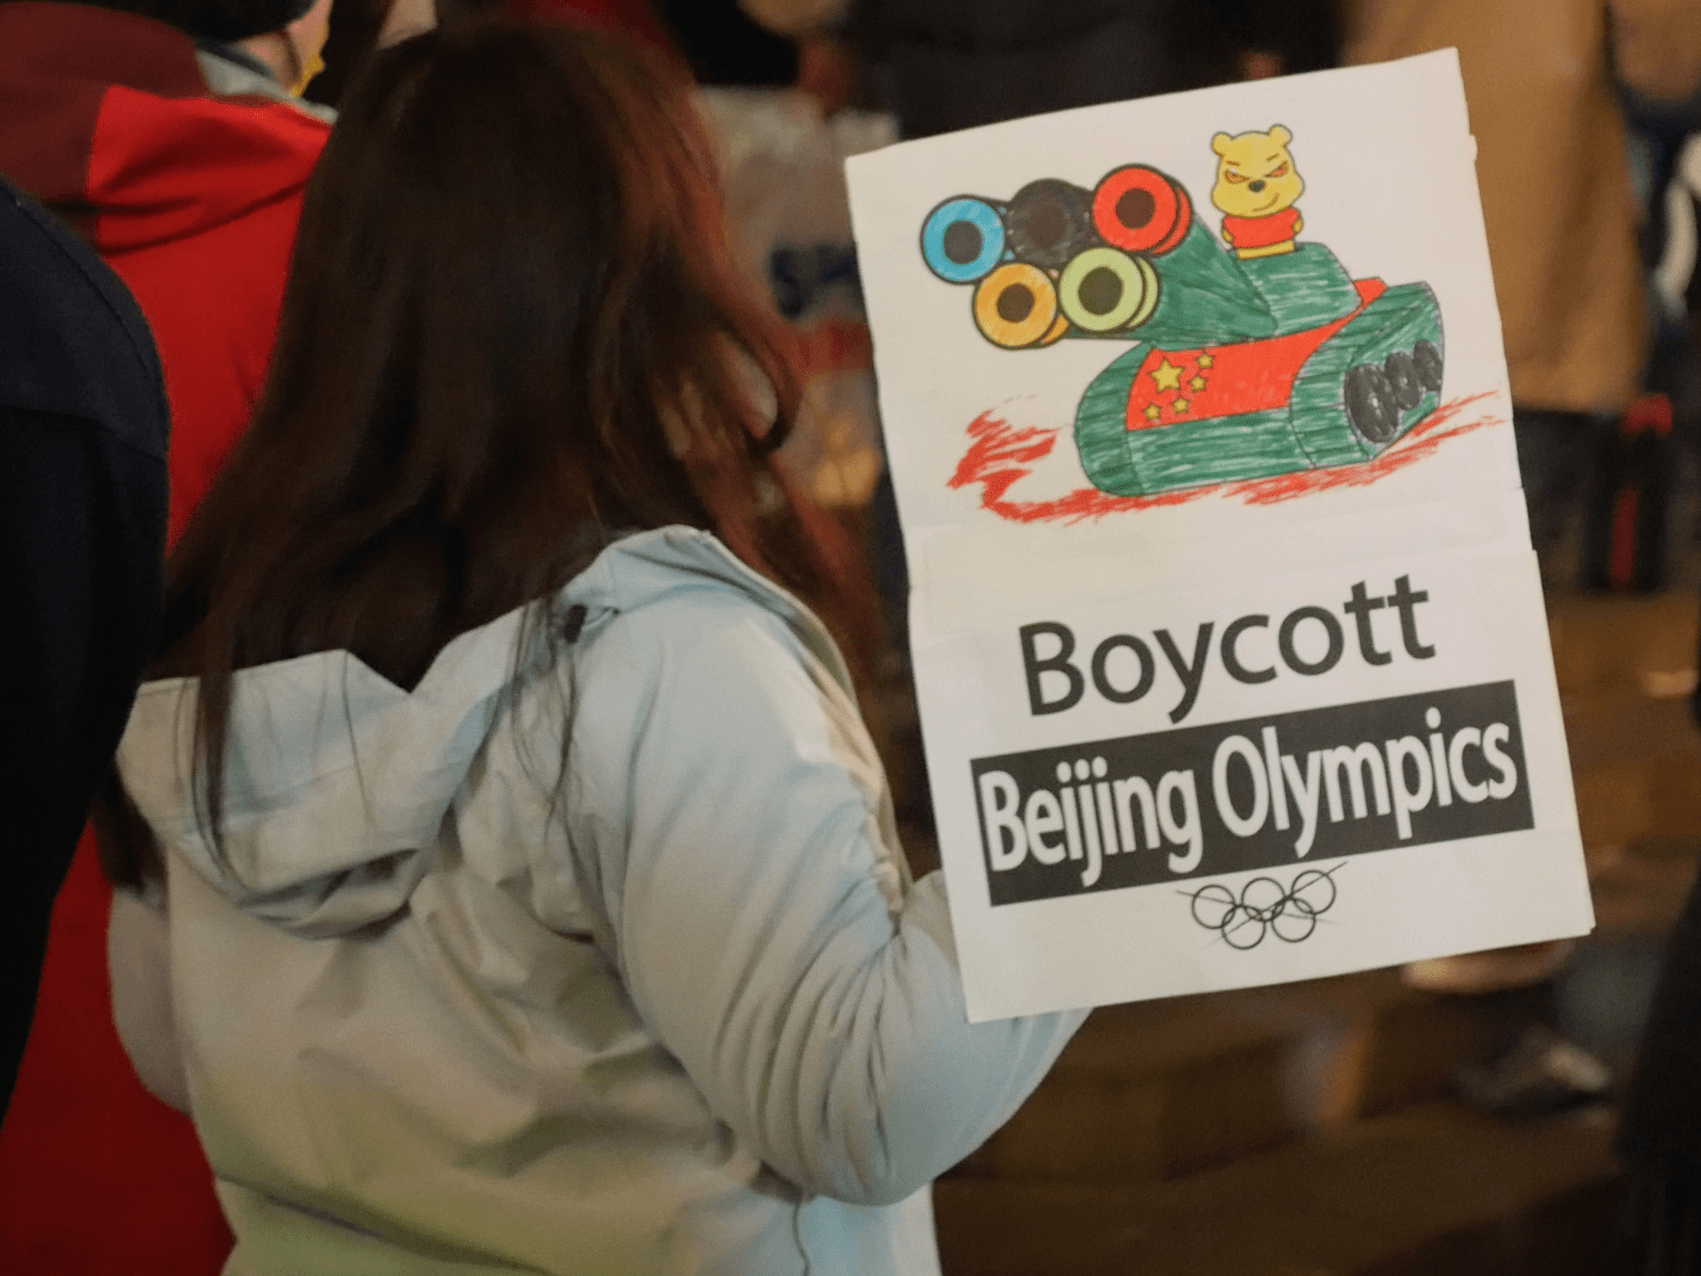 An activist holds a placard mocking Xi Jinping as Winnie the Pooh at a protest in London against the Beijing Olympics, February 3rd, 2022. Kurt Zindulka, Breitbart News